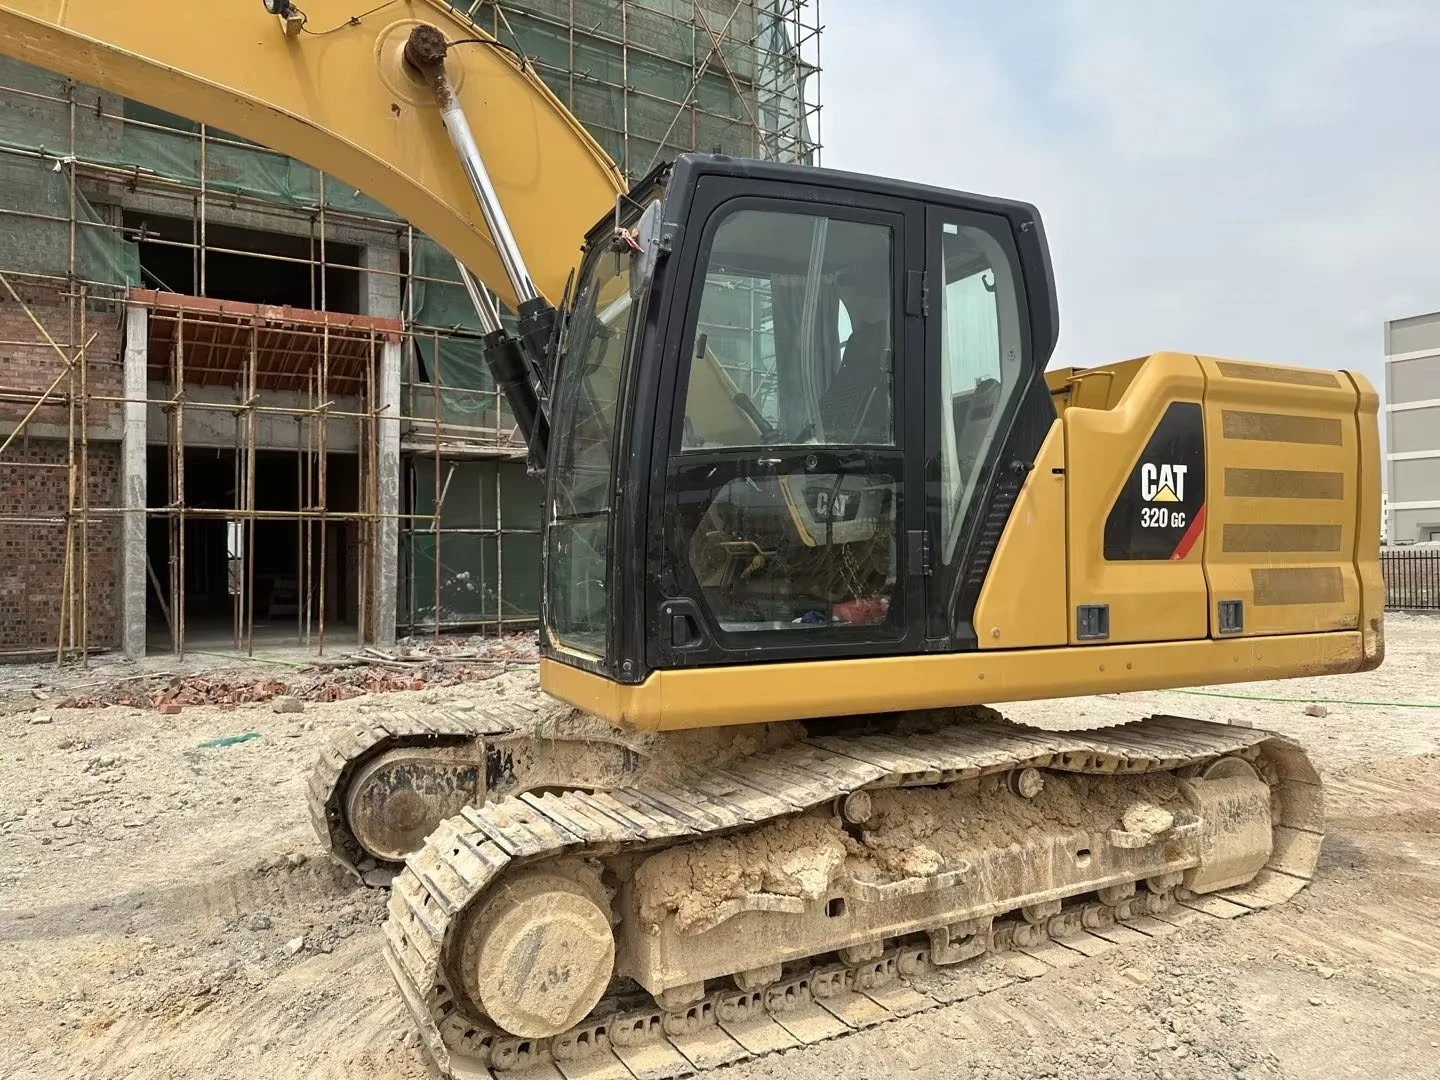 High-quality crawler excav used construction work excavation equipment Trench Digger 20ton sell well Used Excavator